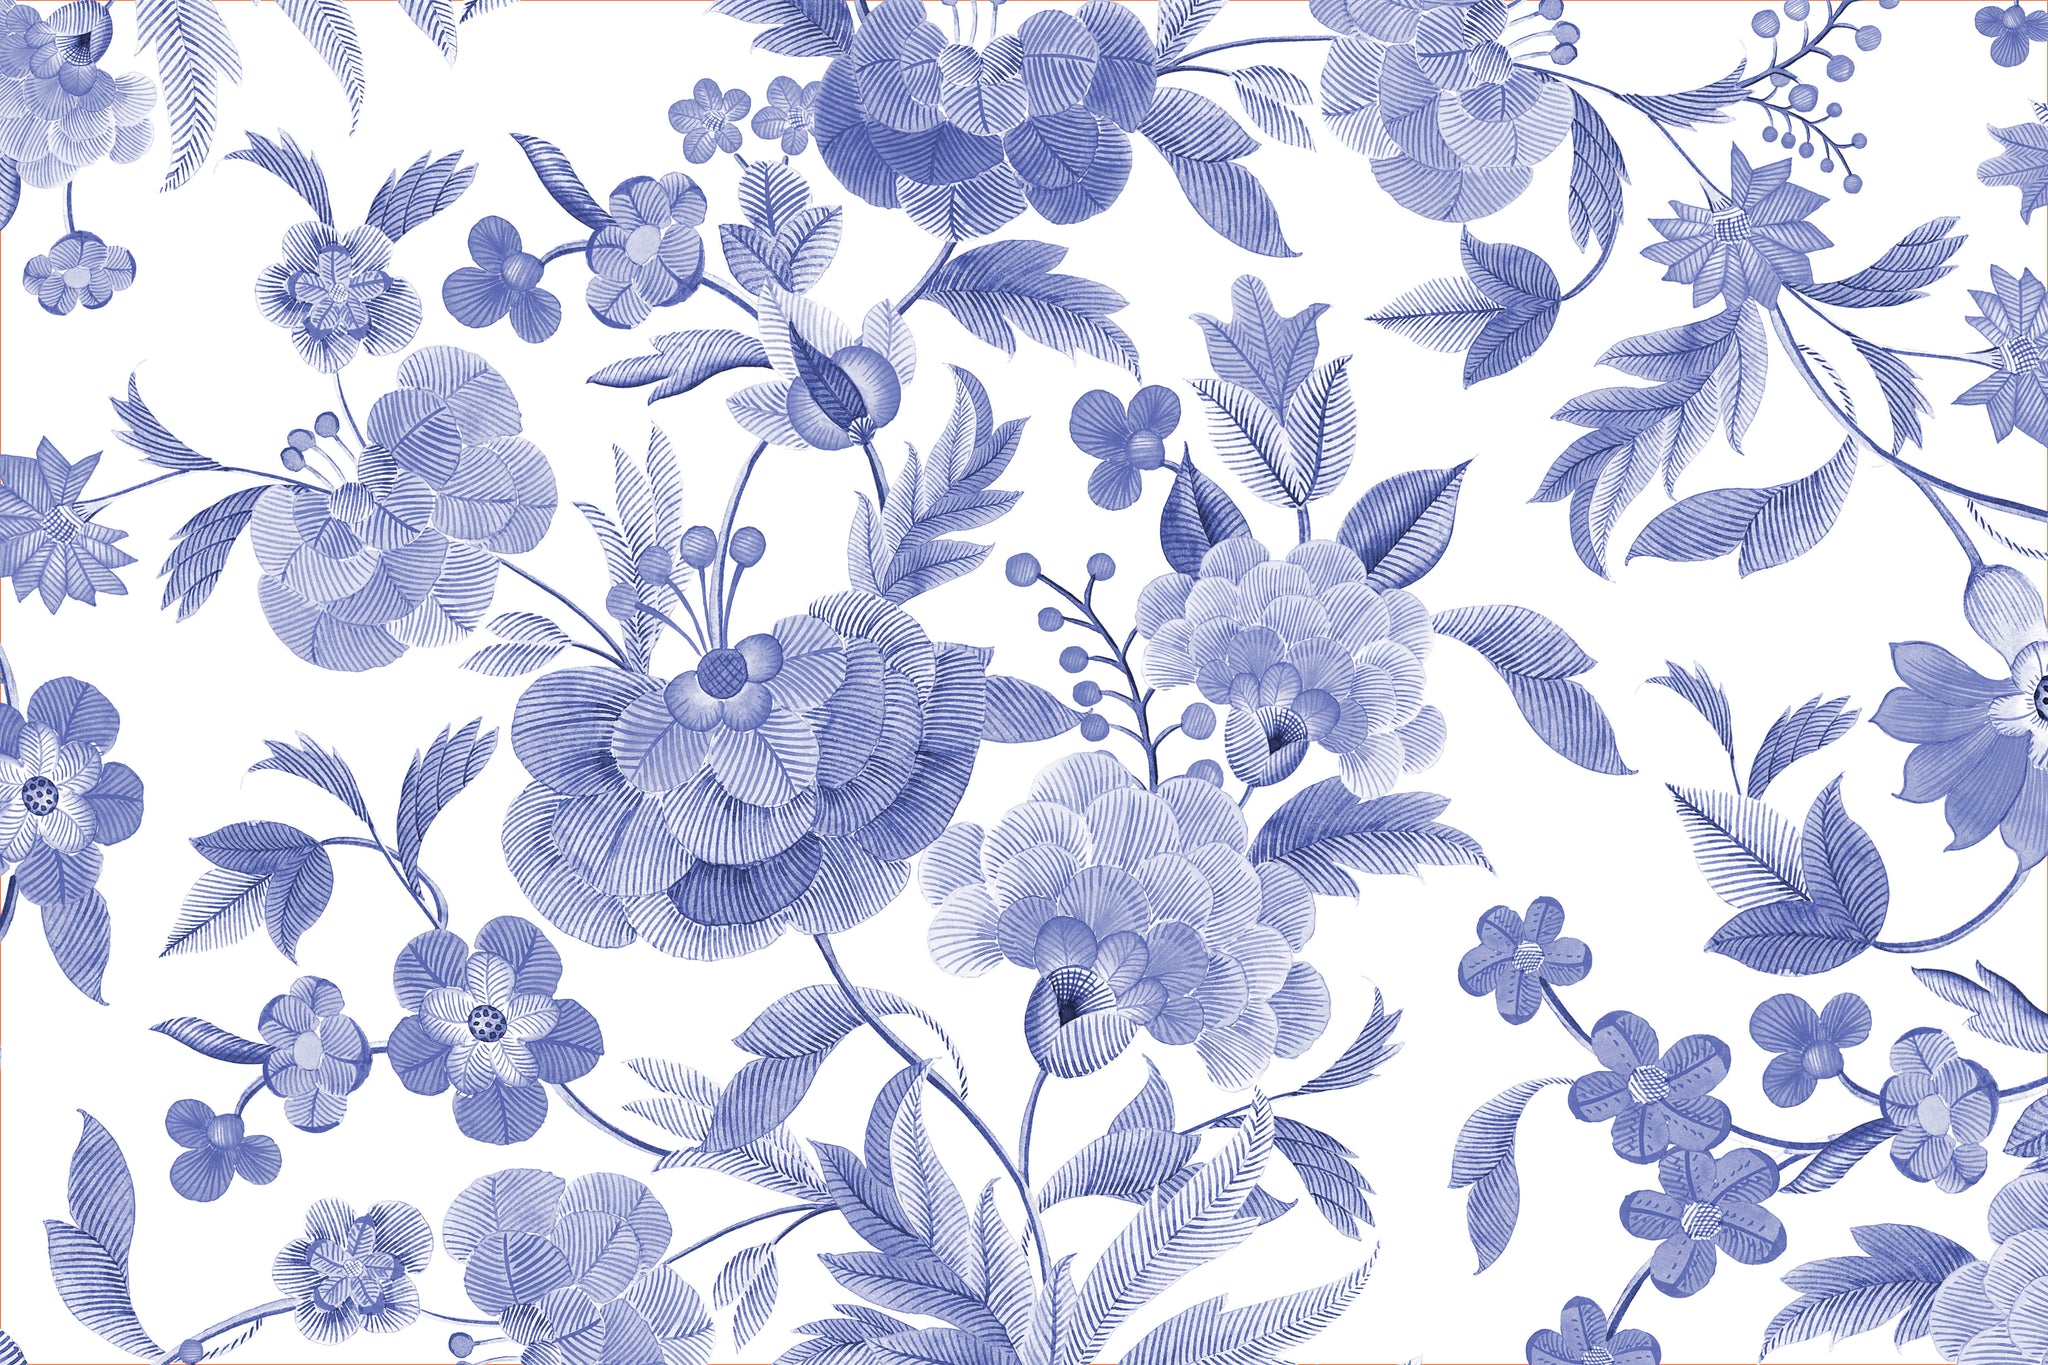 Birdie Placemats- Blue and White